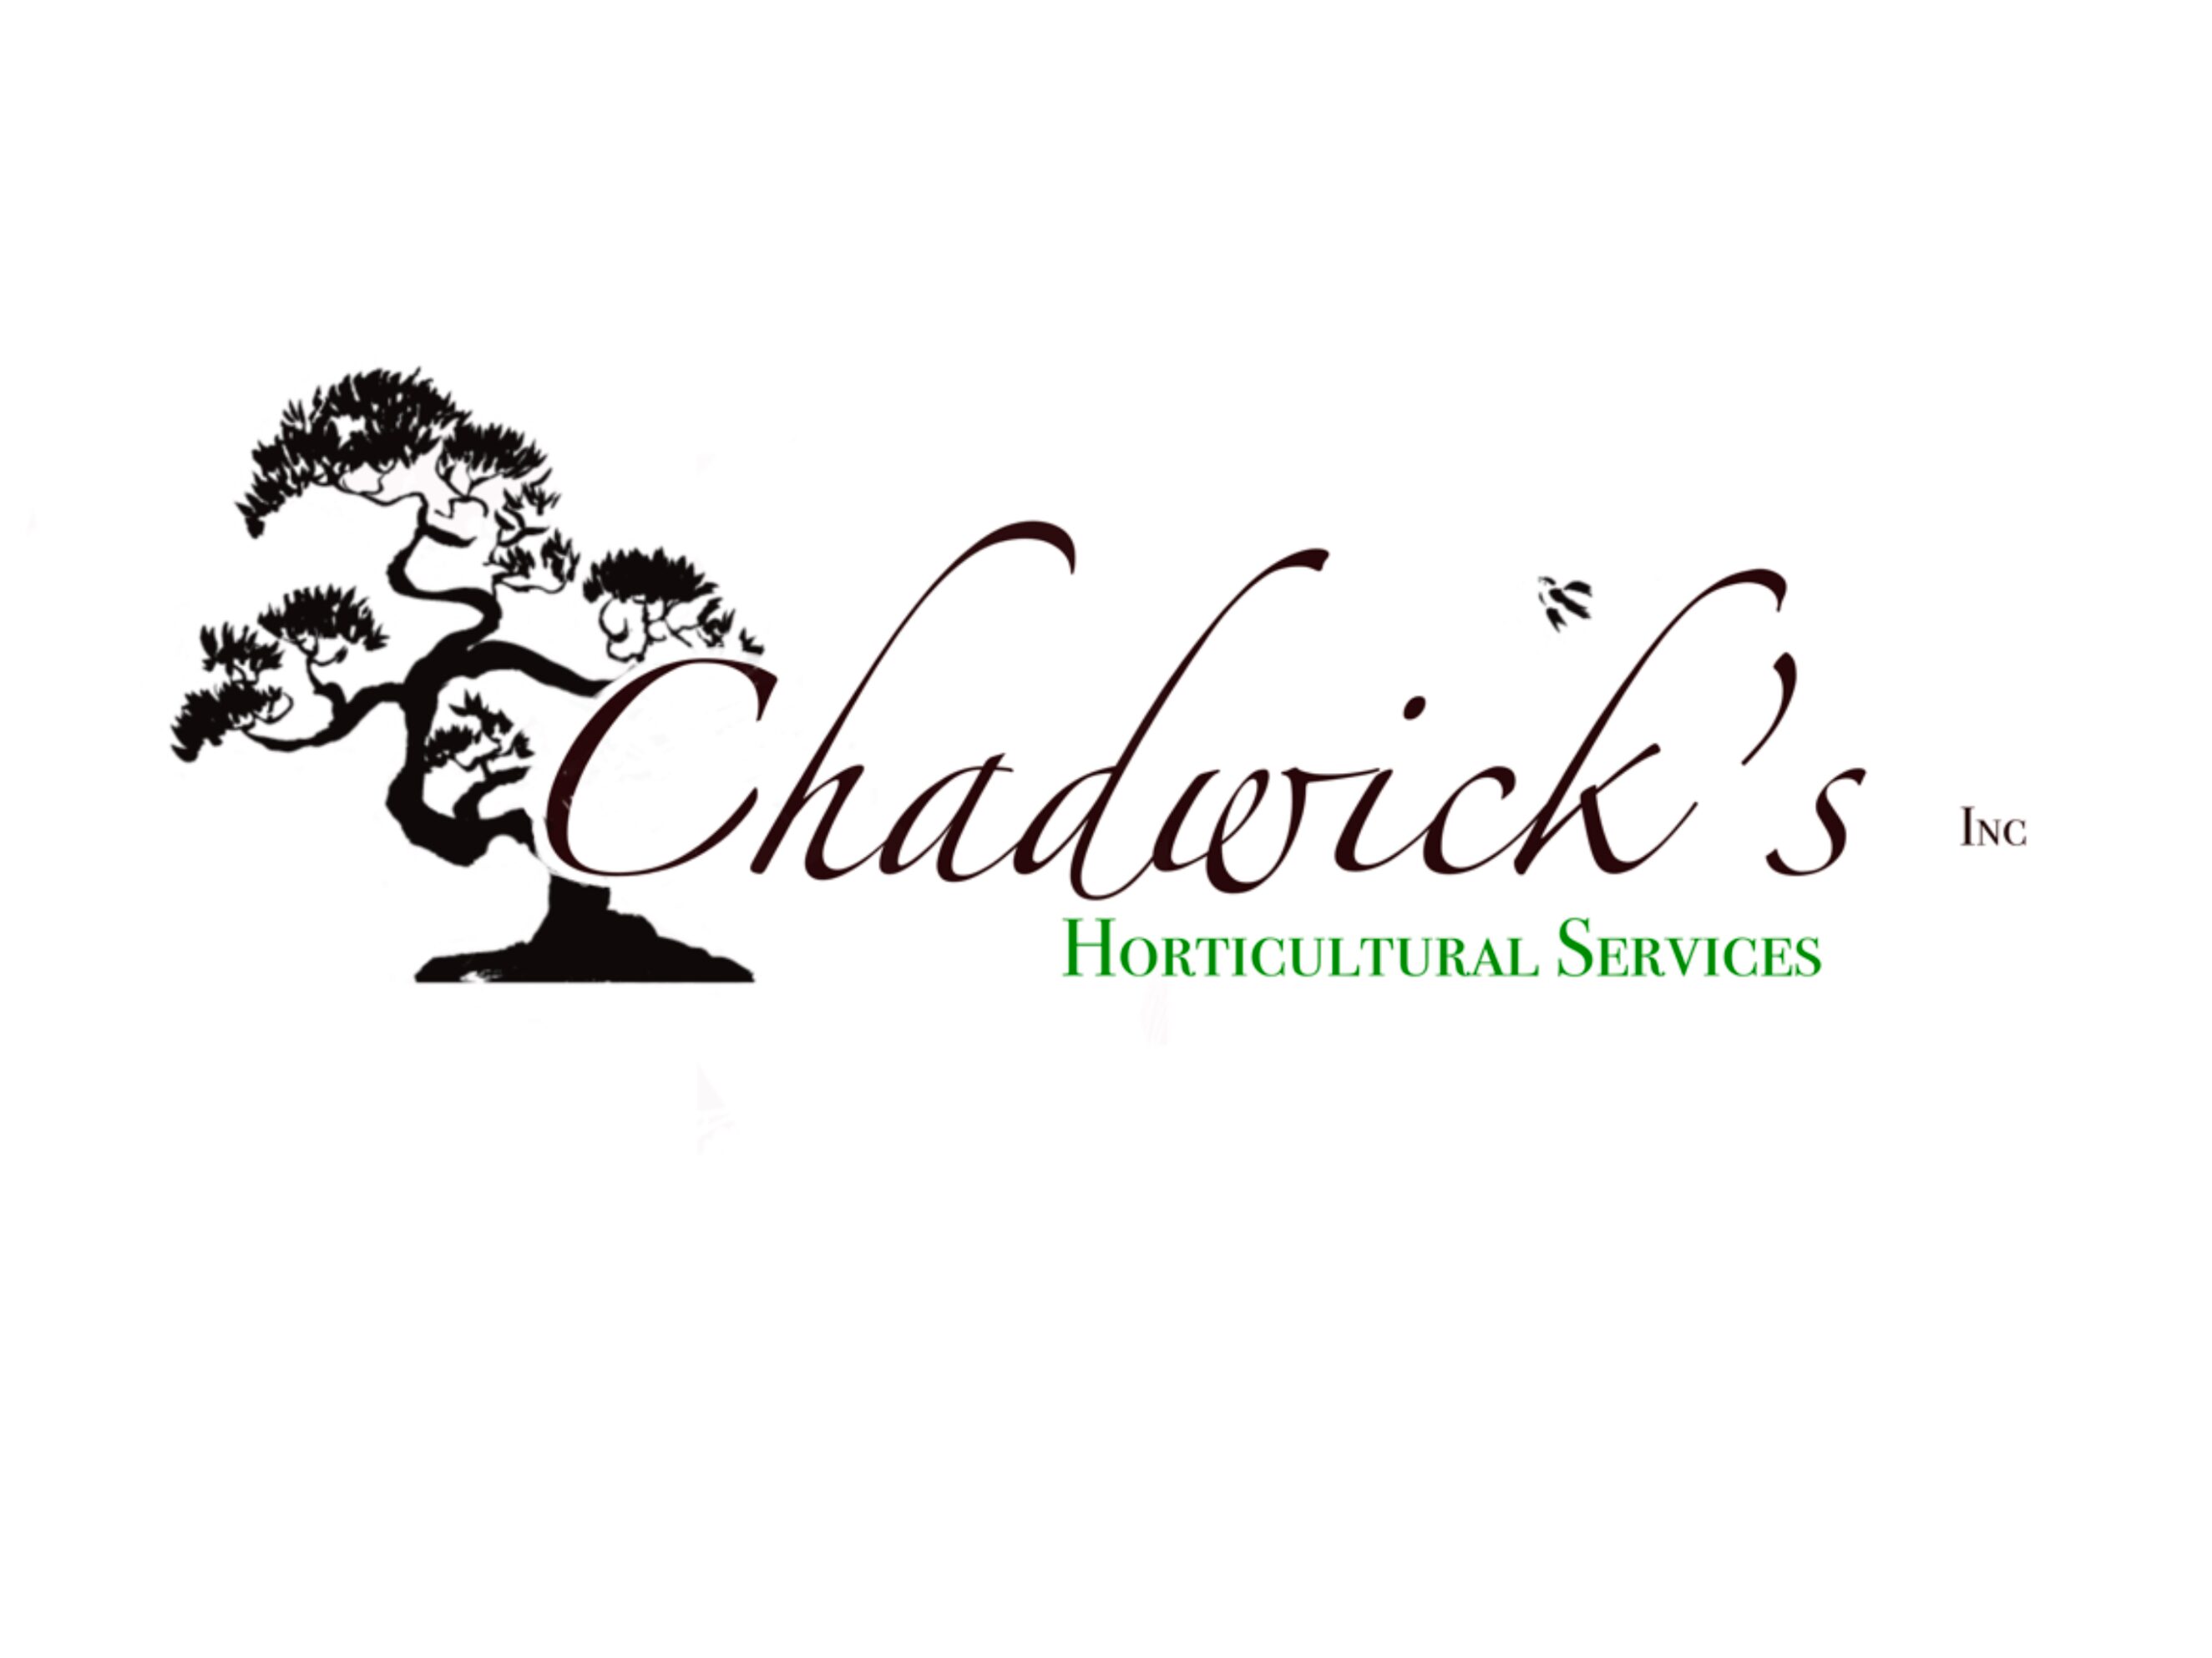 Chadwick’s Horticultural Services Inc.